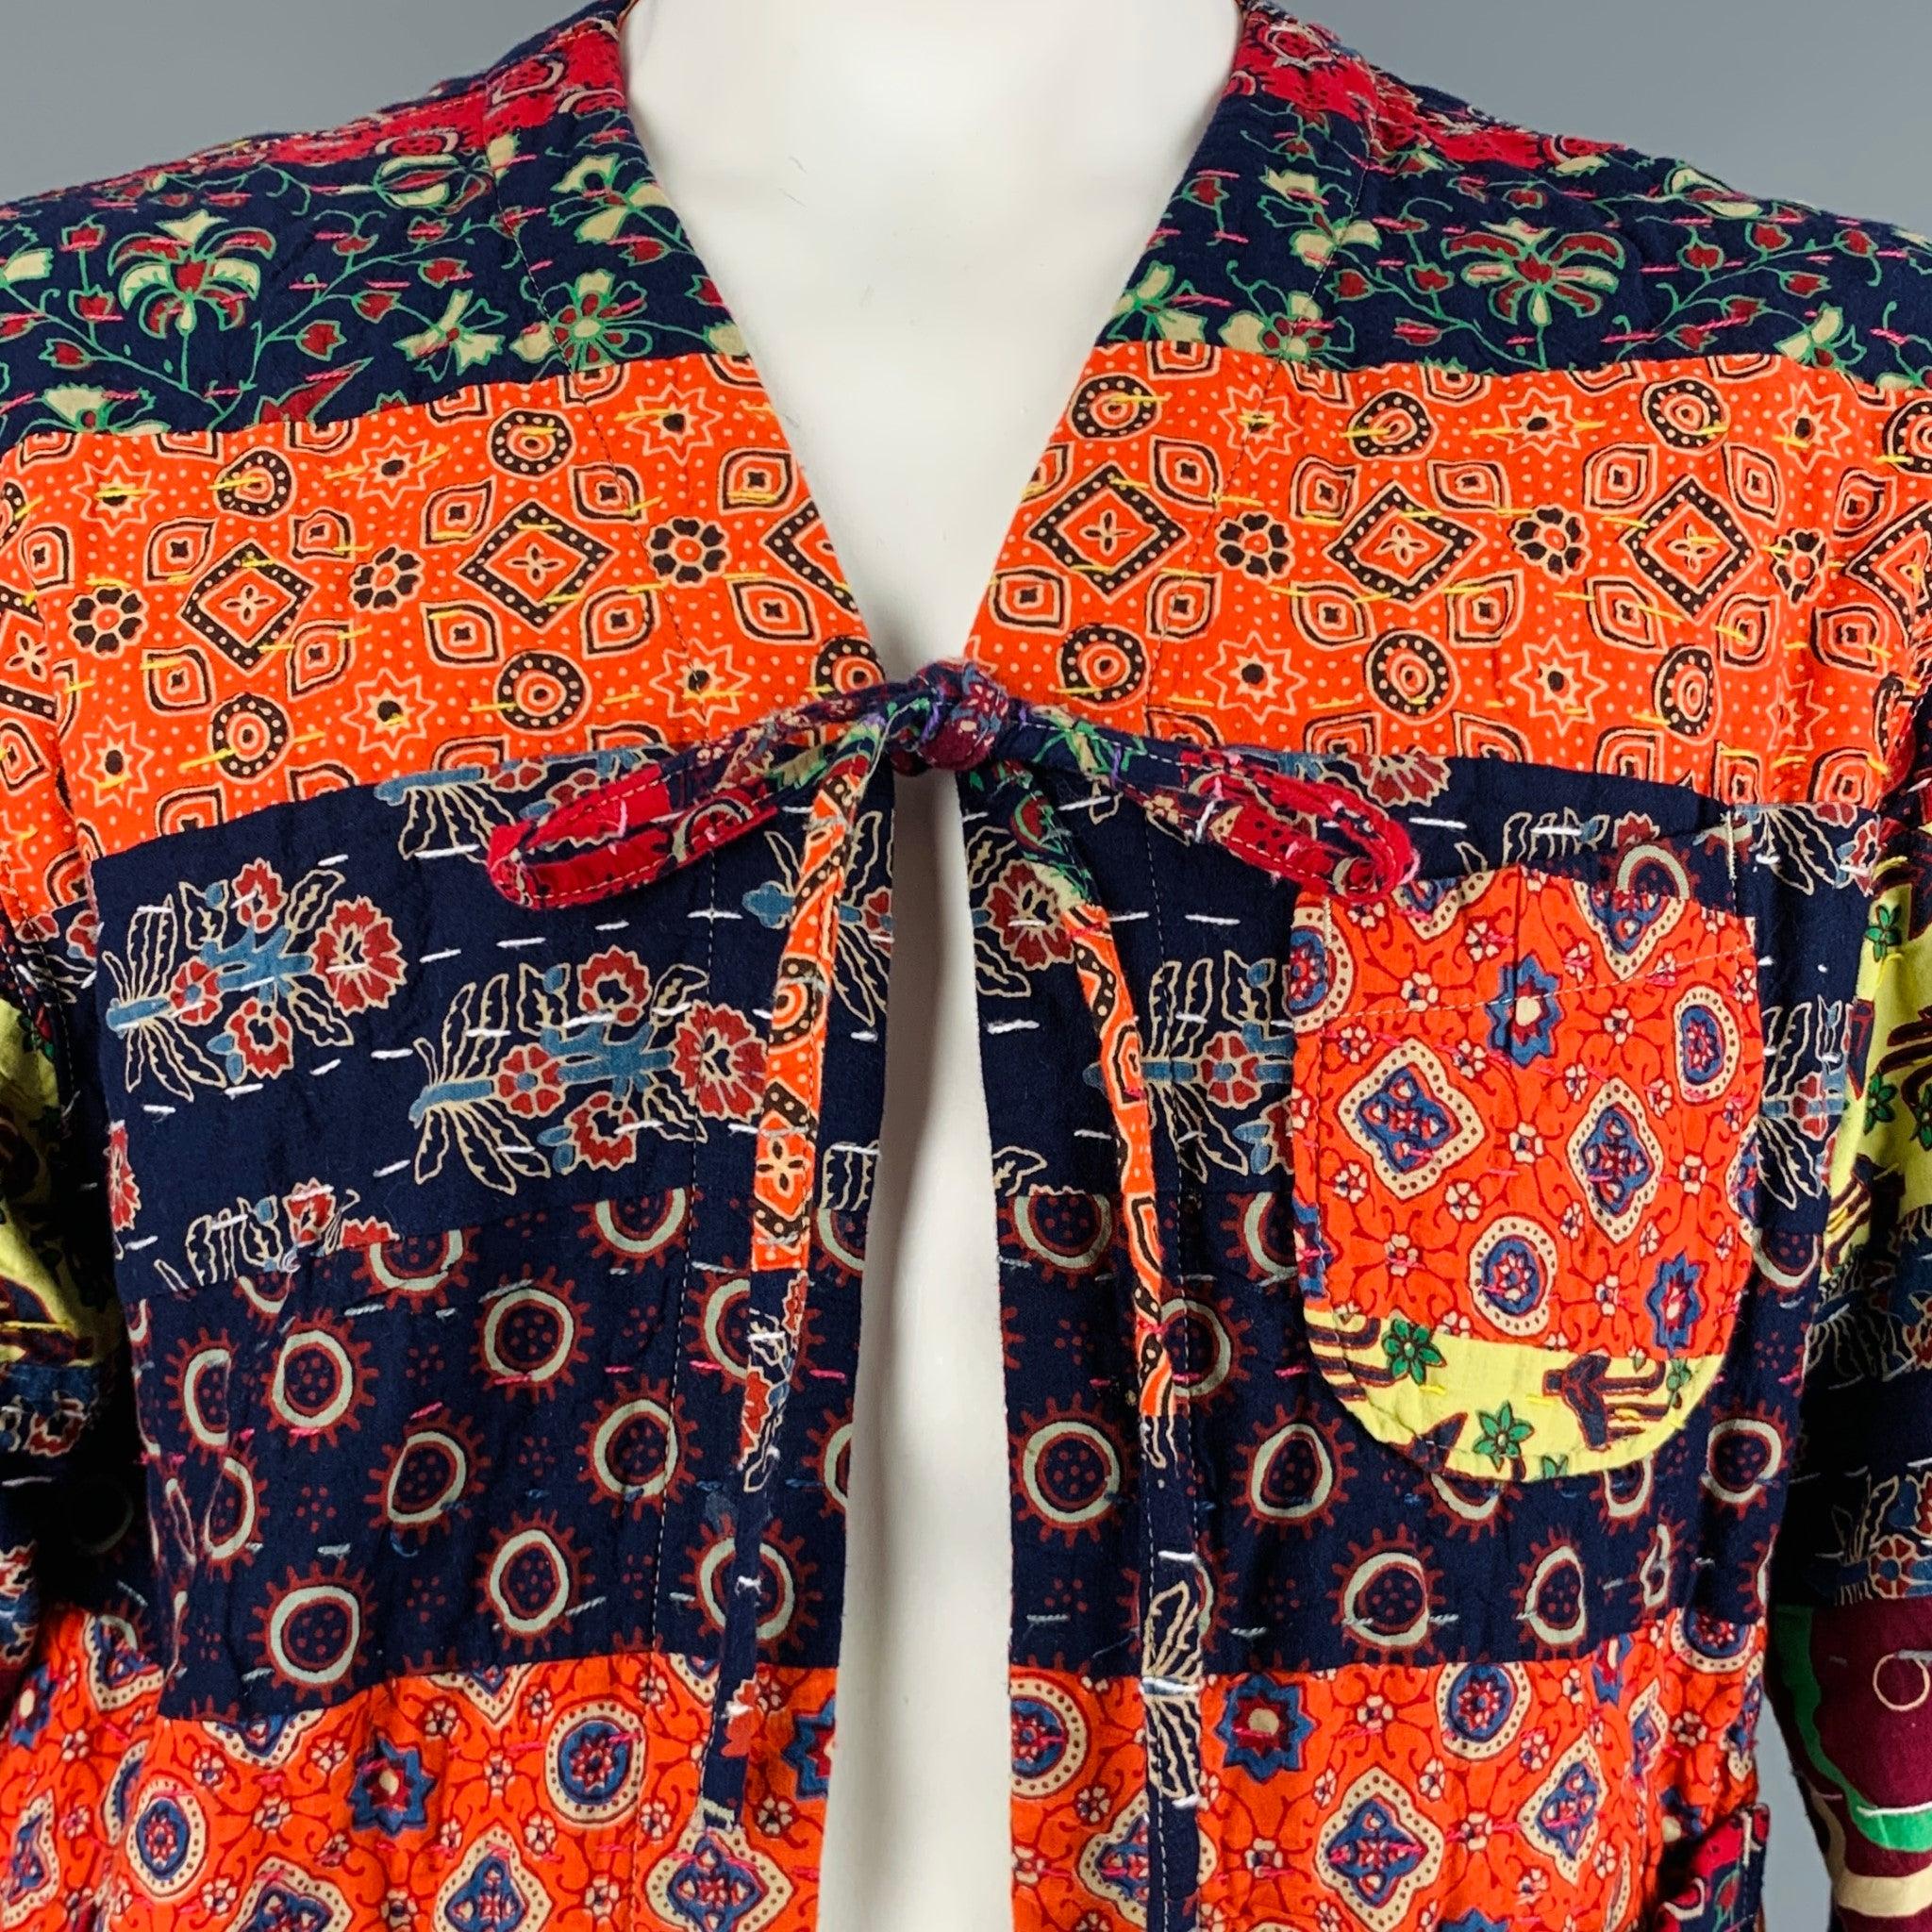 ENGINEERED GARMENTS jacket
in a multi-color cotton fabric featuring mixed patterns with running stitch details, collarless style, and tied front. Made in New York.Excellent Pre-Owned Condition. 

Marked:   3 

Measurements: 
 
Shoulder: 19.5 inches